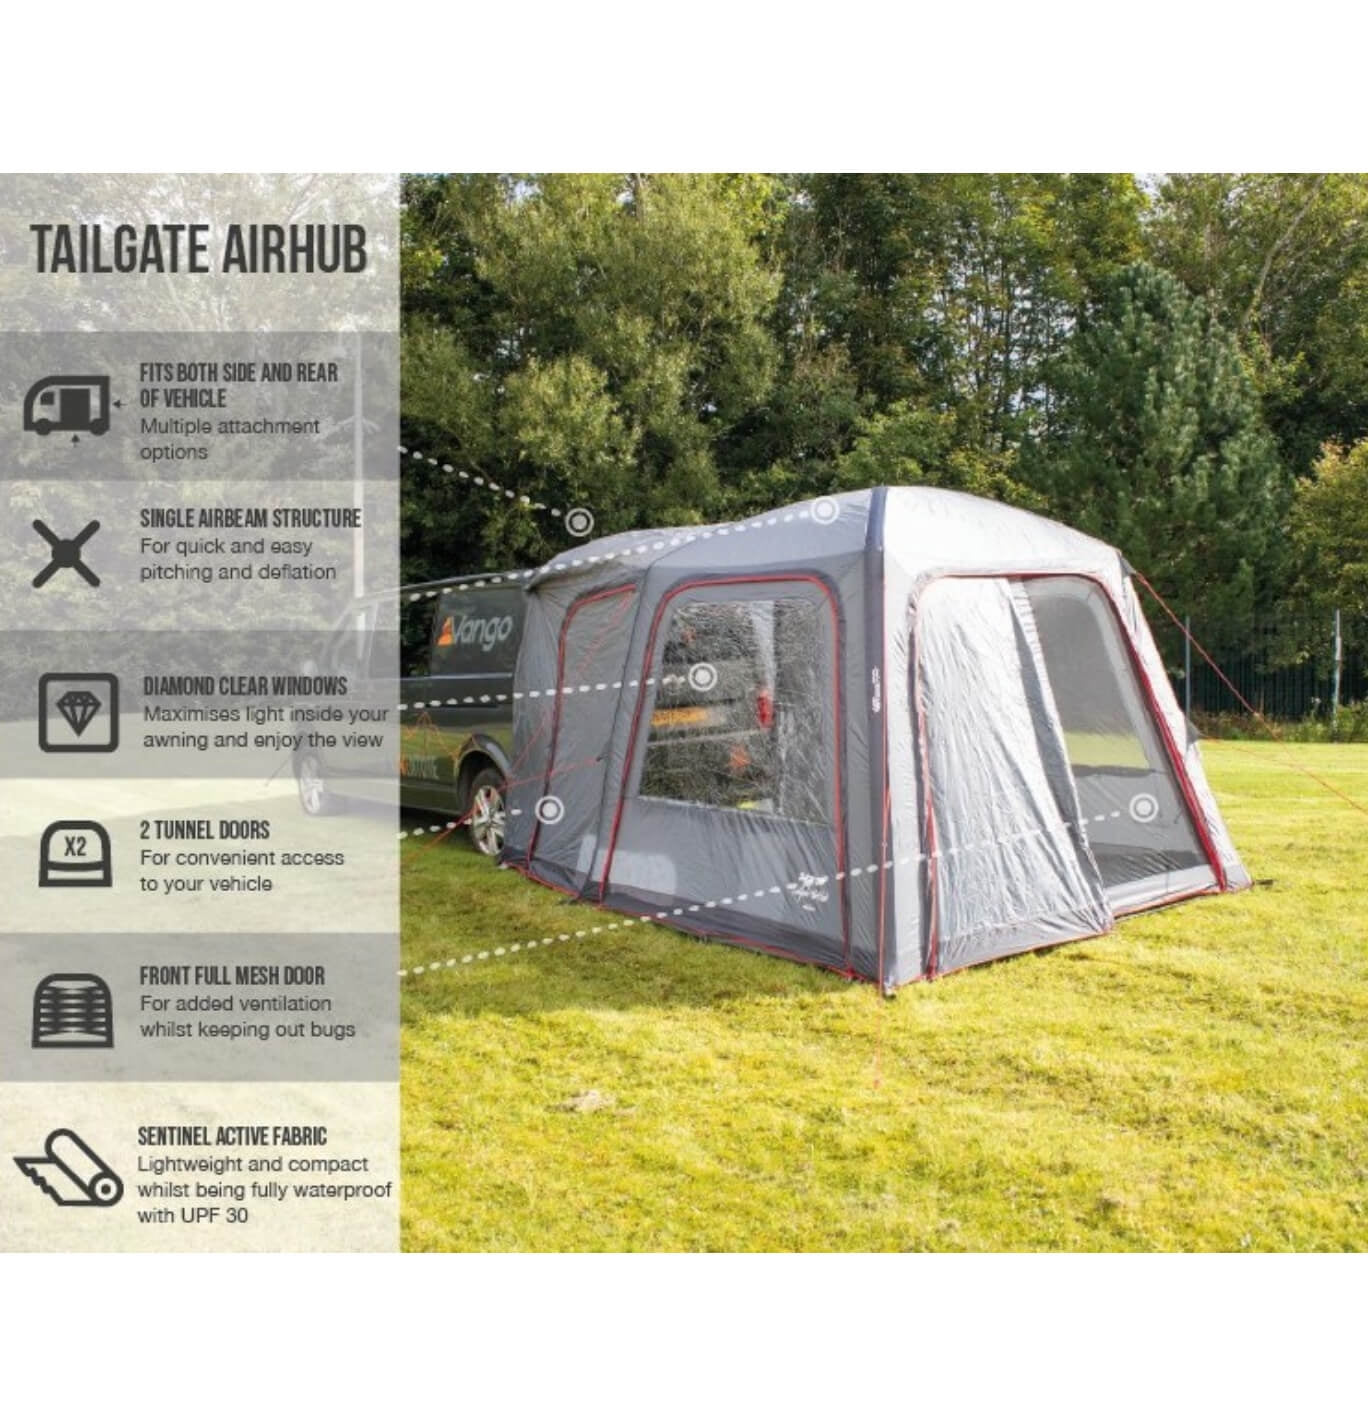 Vangp Tailgate tent listed features